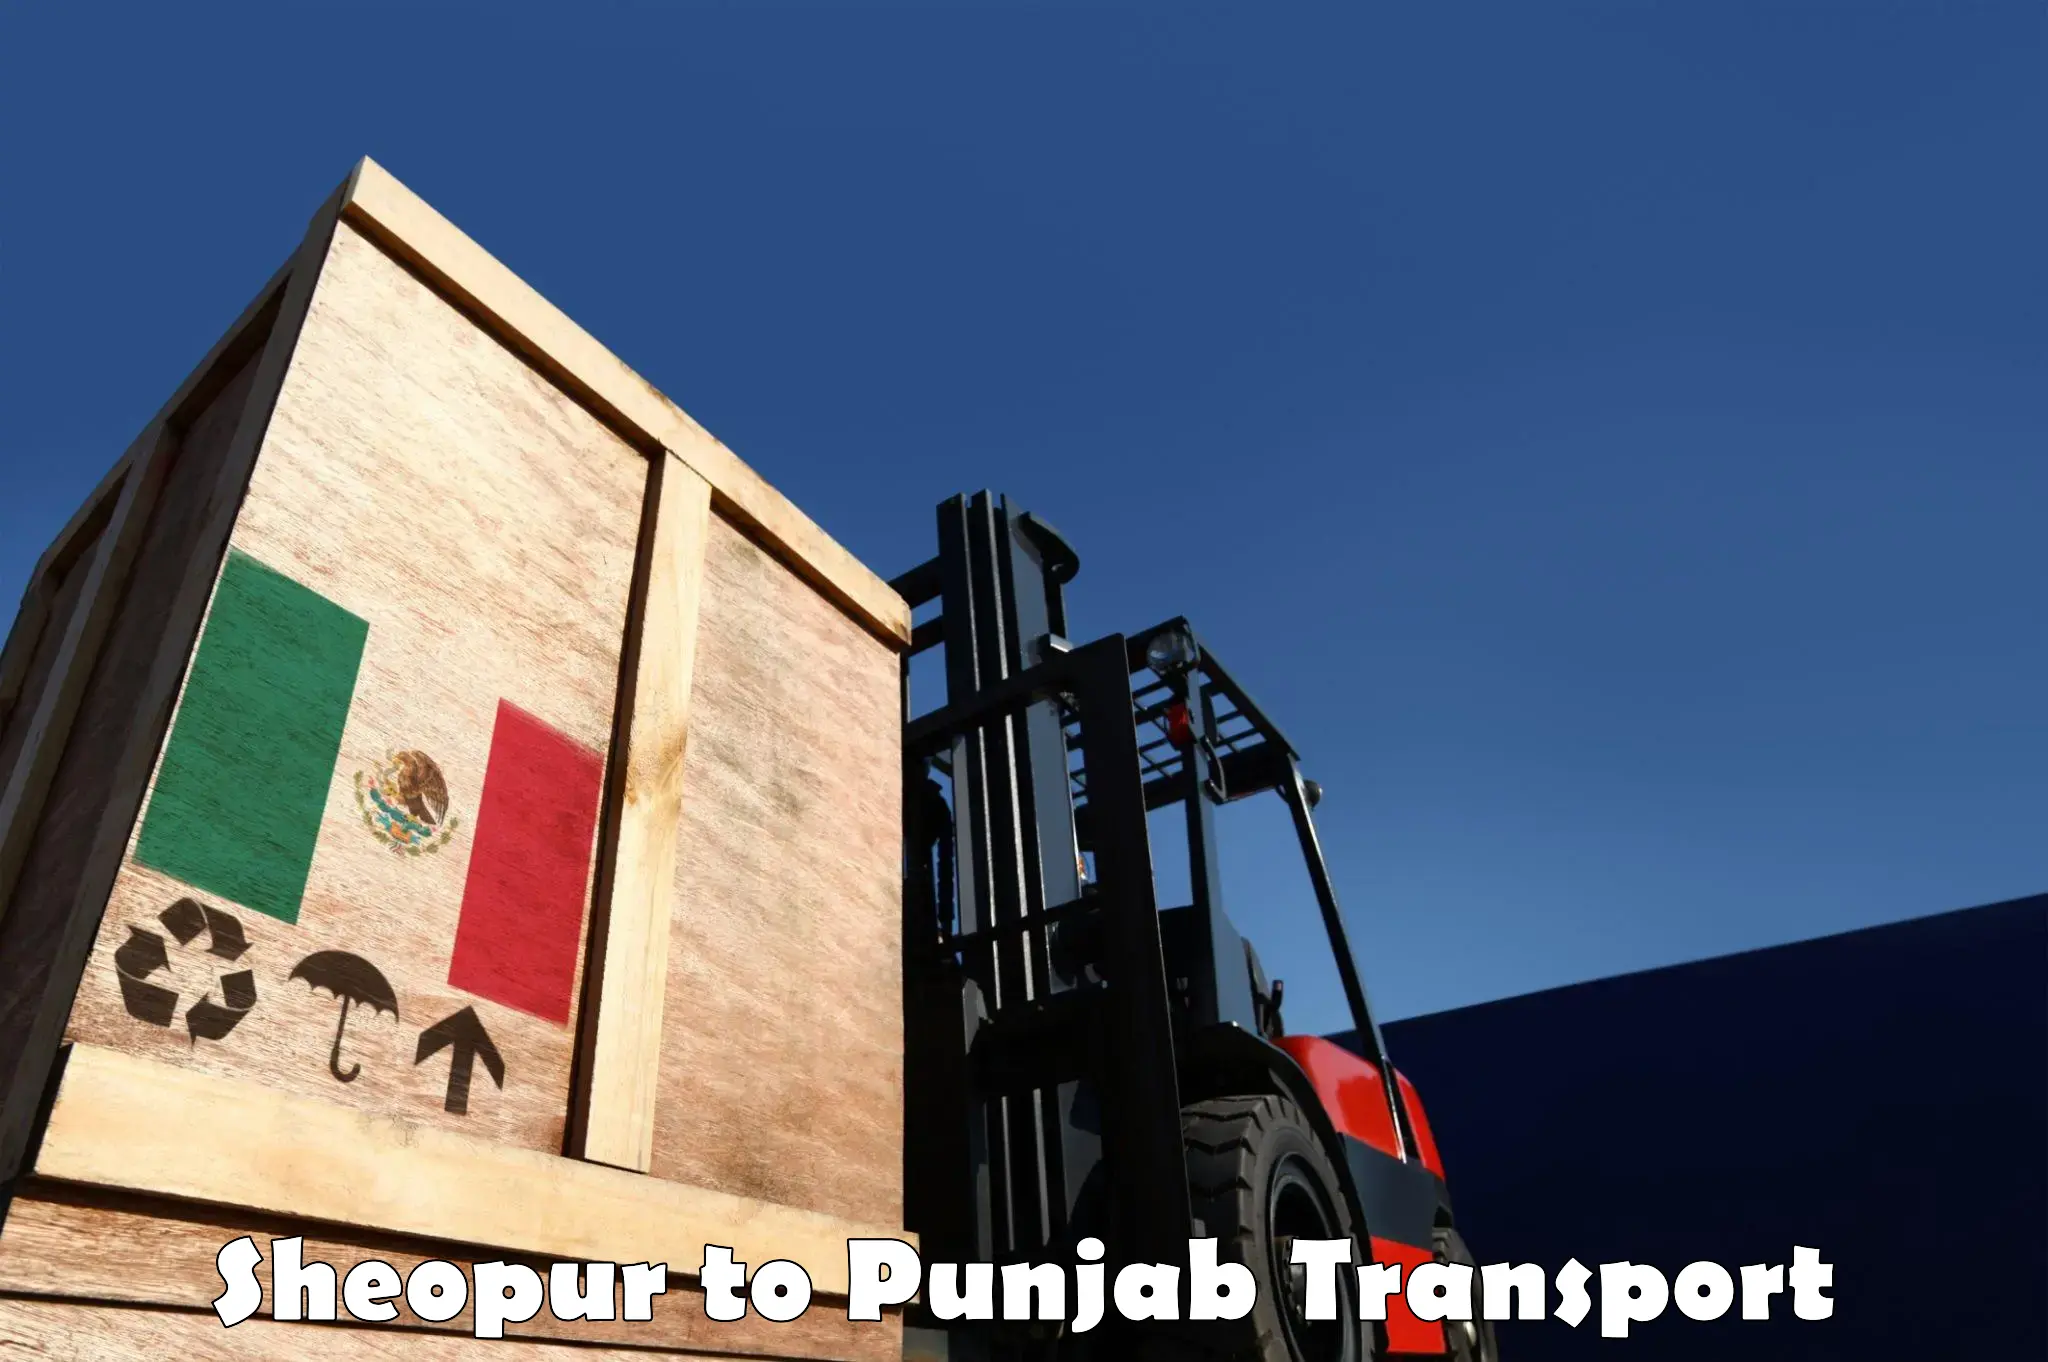 Express transport services Sheopur to Patiala